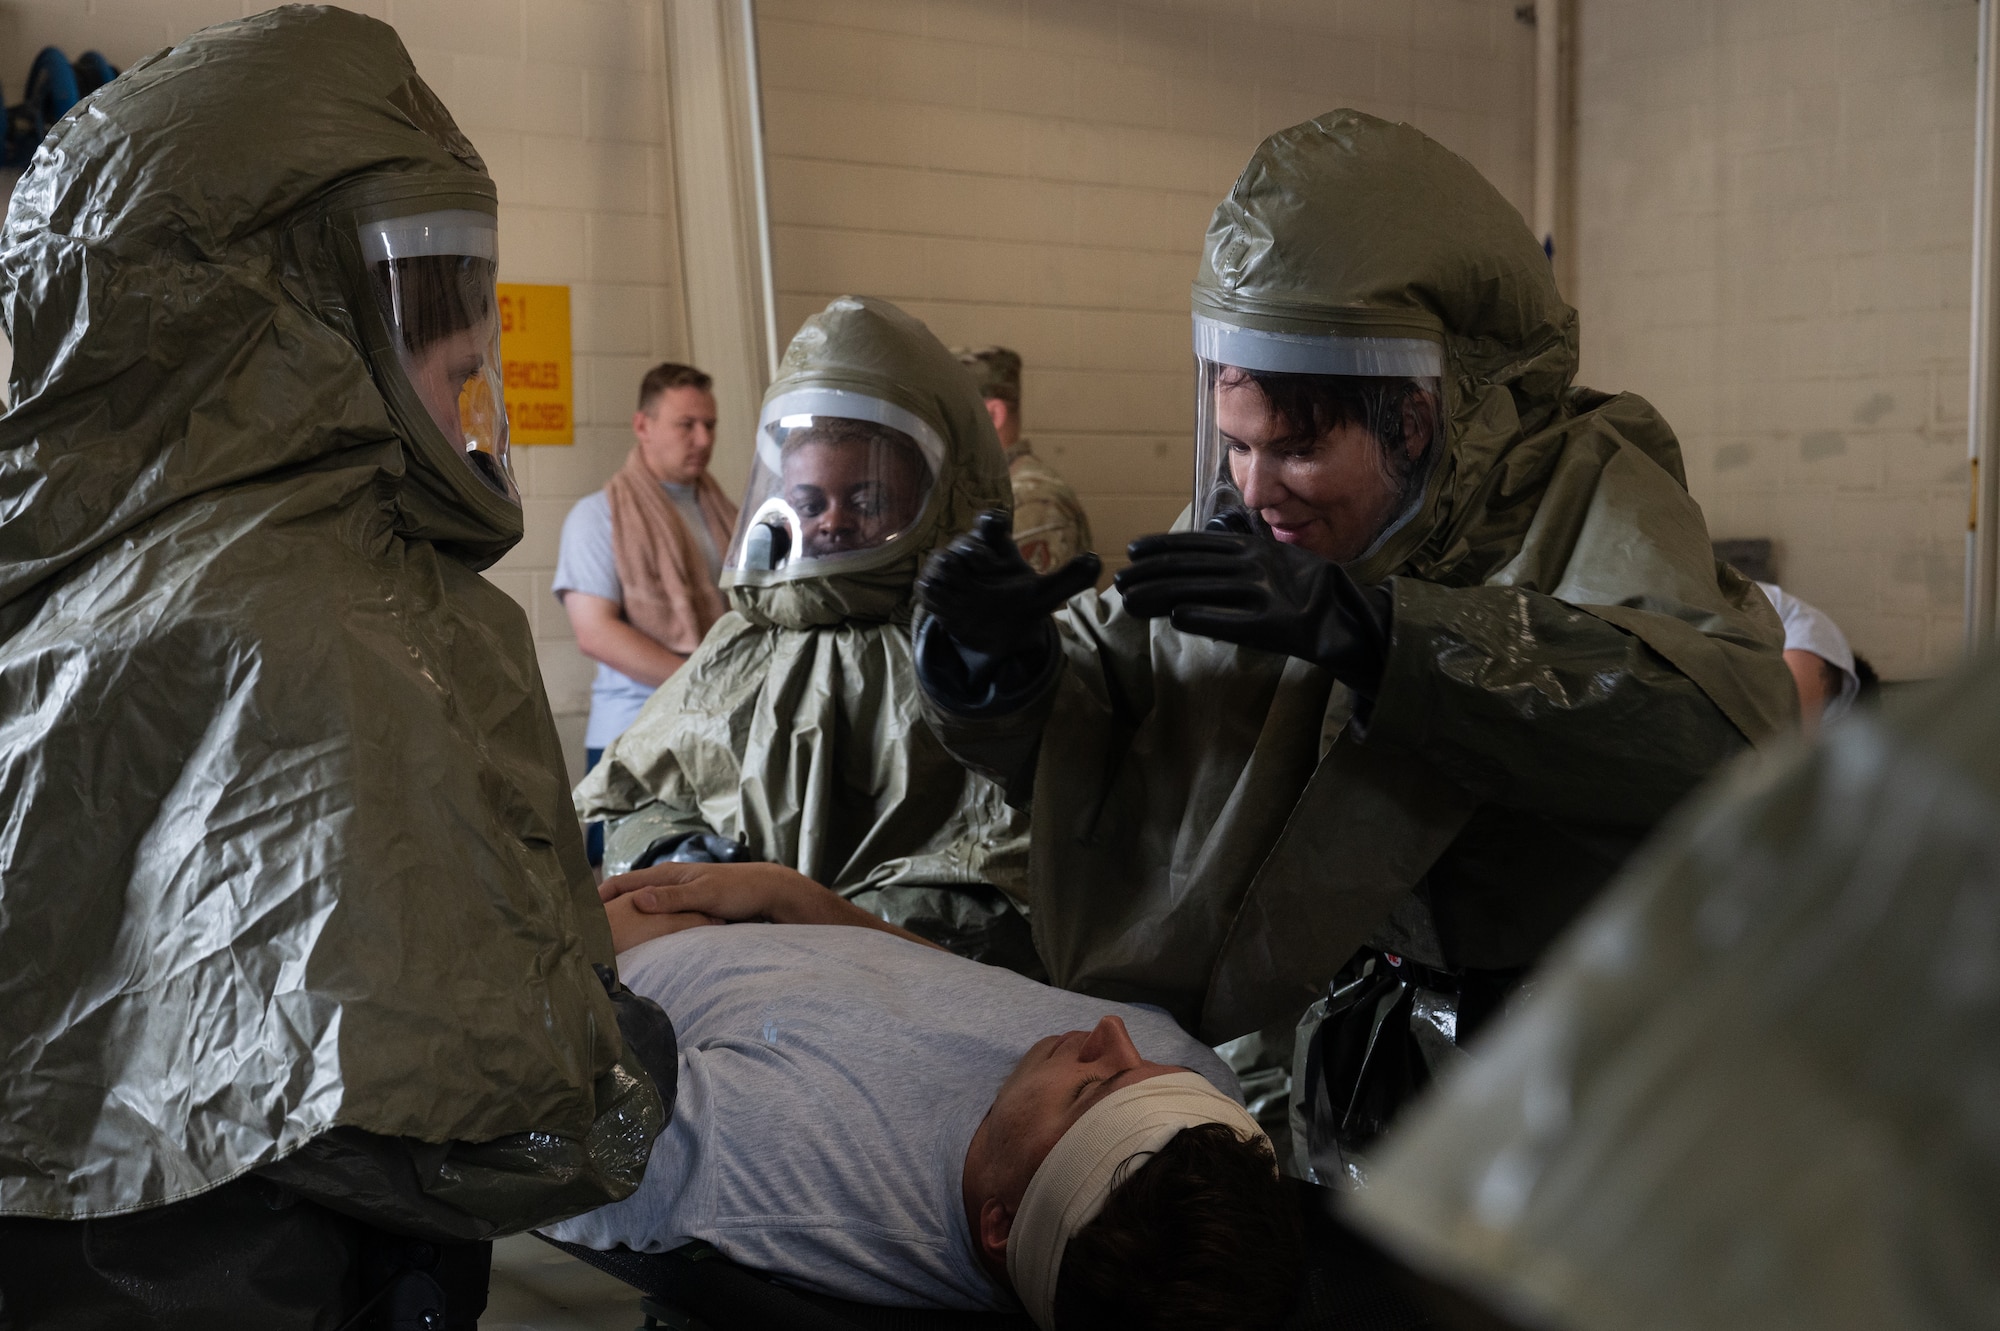 8th Operational Medical Readiness Human Performance Flight commander, leads the patient decontamination team during a mass casualty training event at Kunsan Air Base